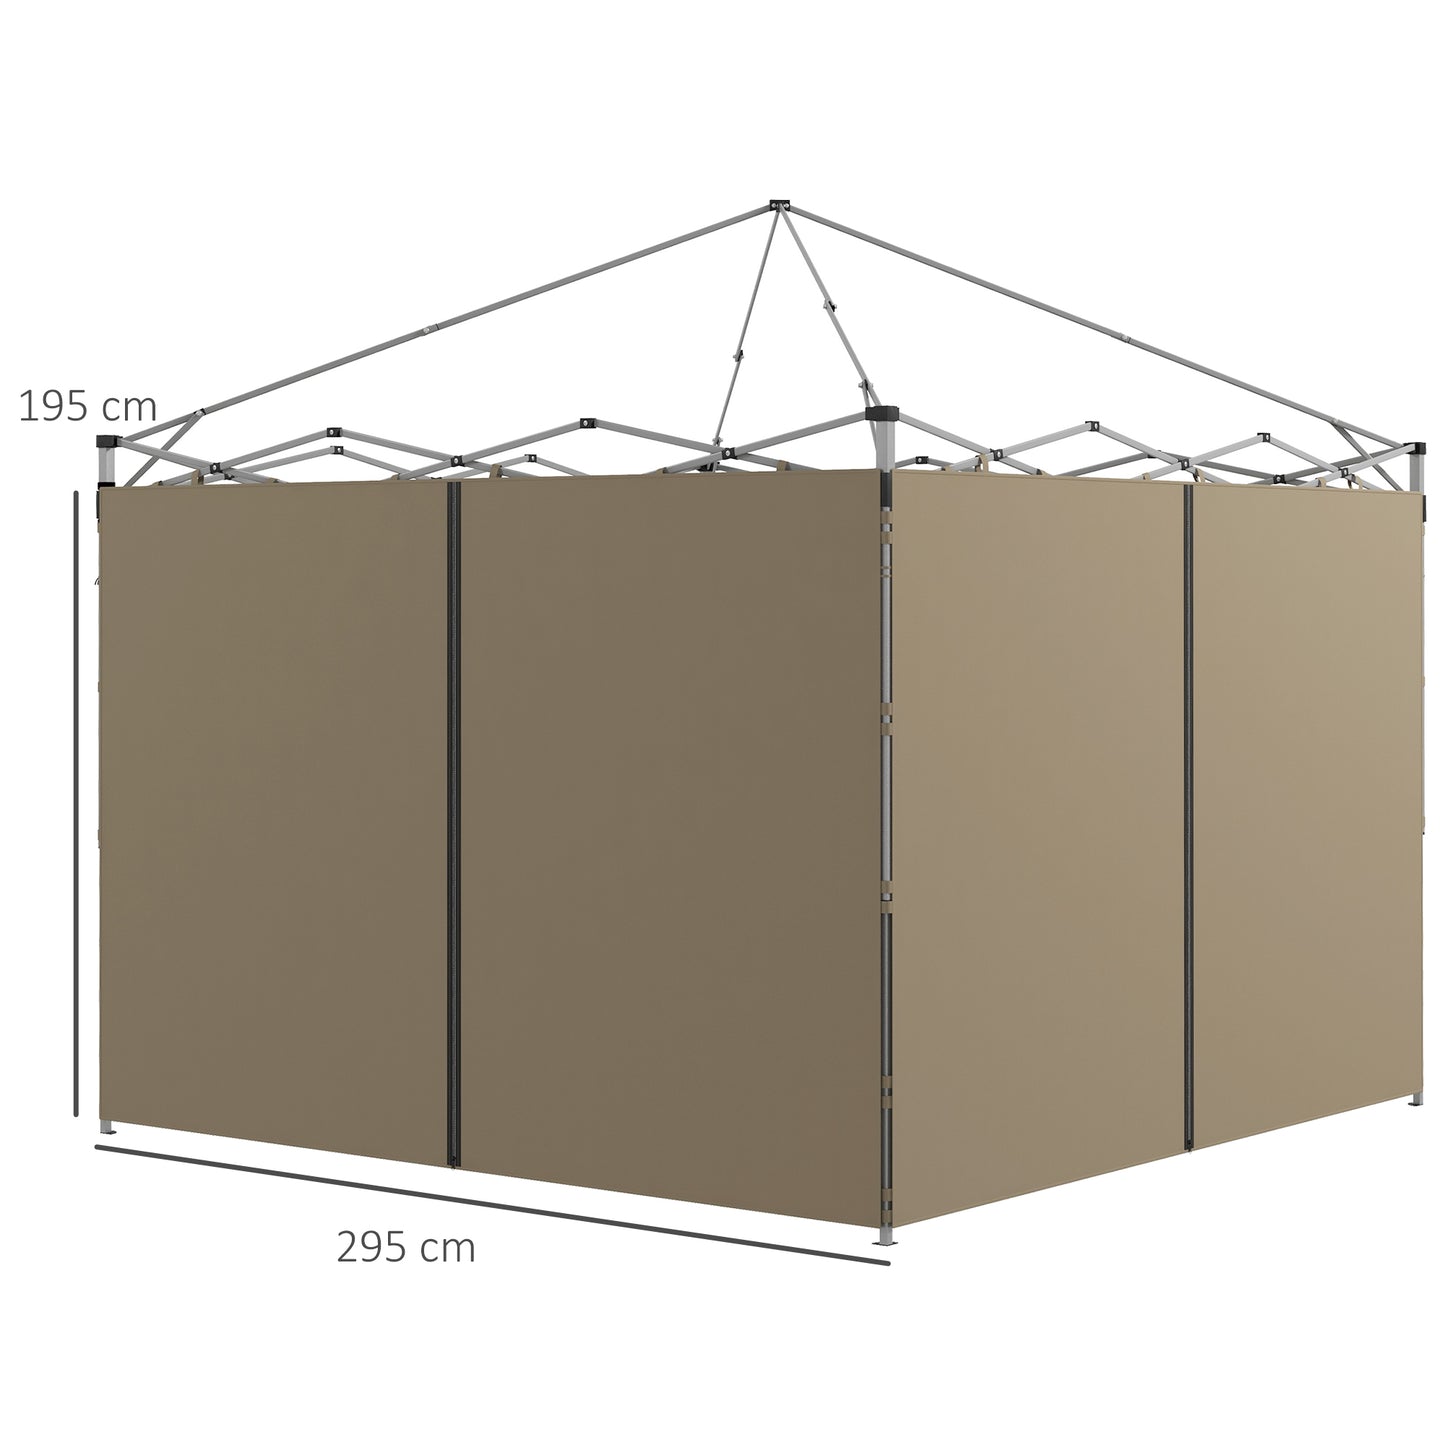 Outsunny Gazebo Side Panels, 2 Pack with Zipped Doors, Replacement for 3x3m or 3x6m Pop Up Gazebos, Beige